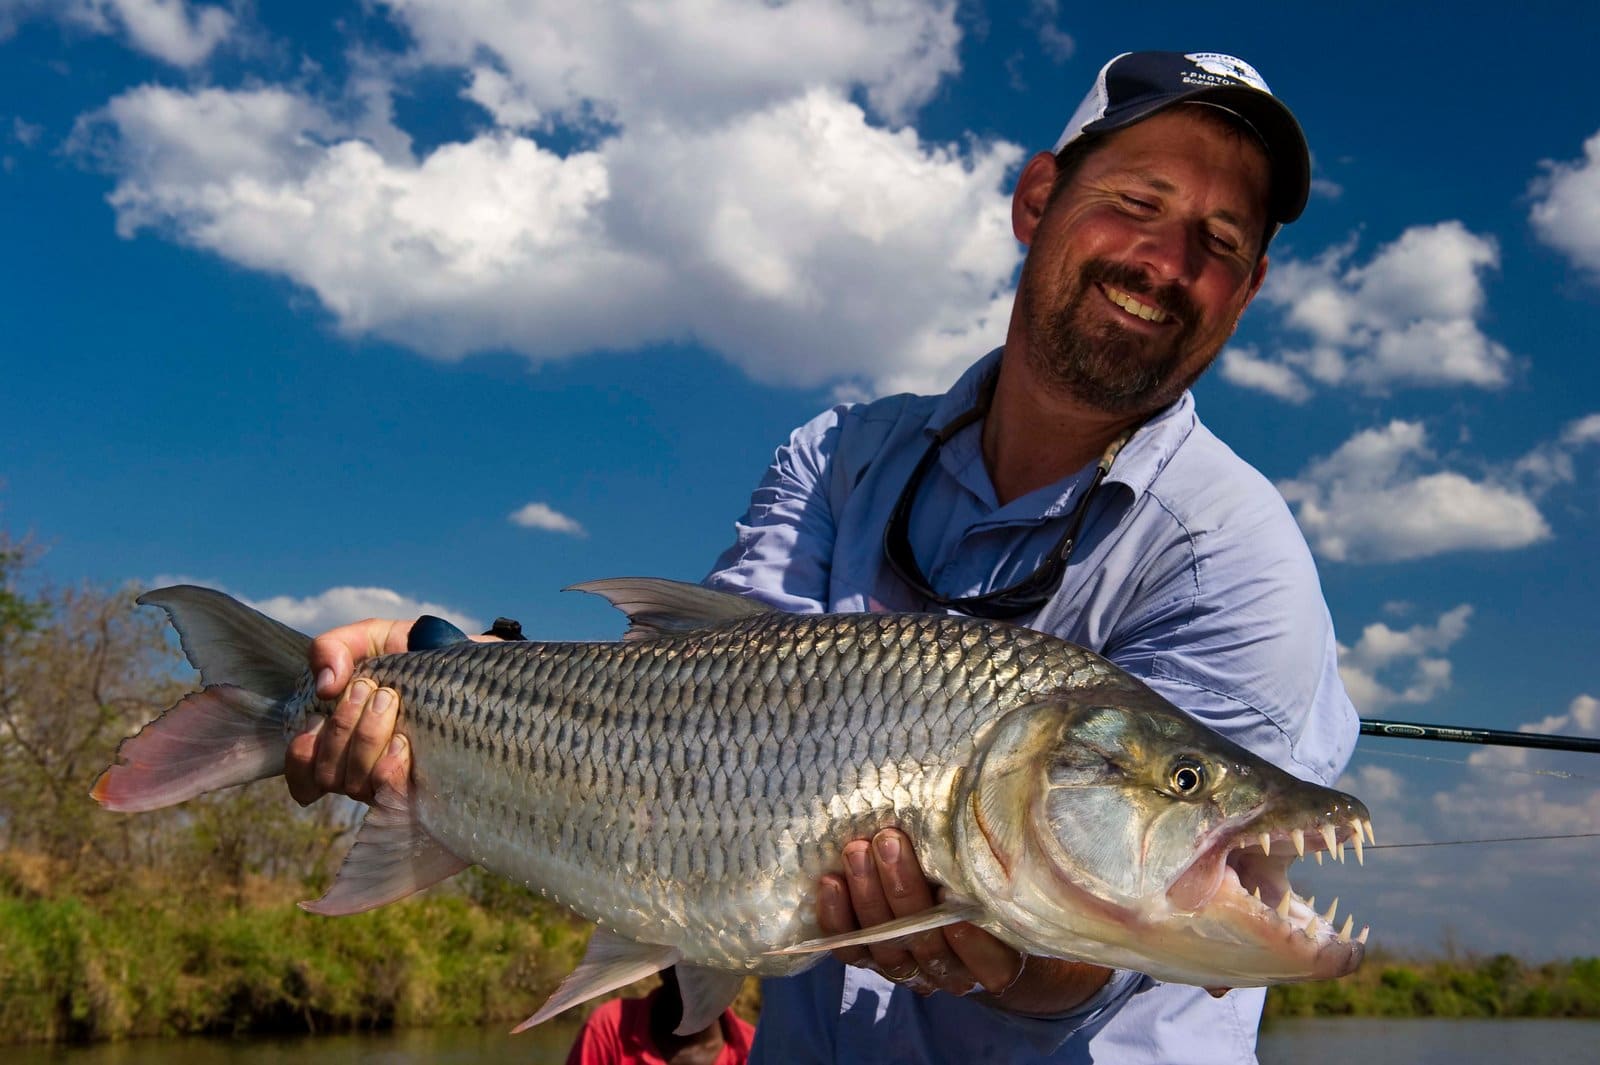 Tiger fishing is a drawcard for avid anglers